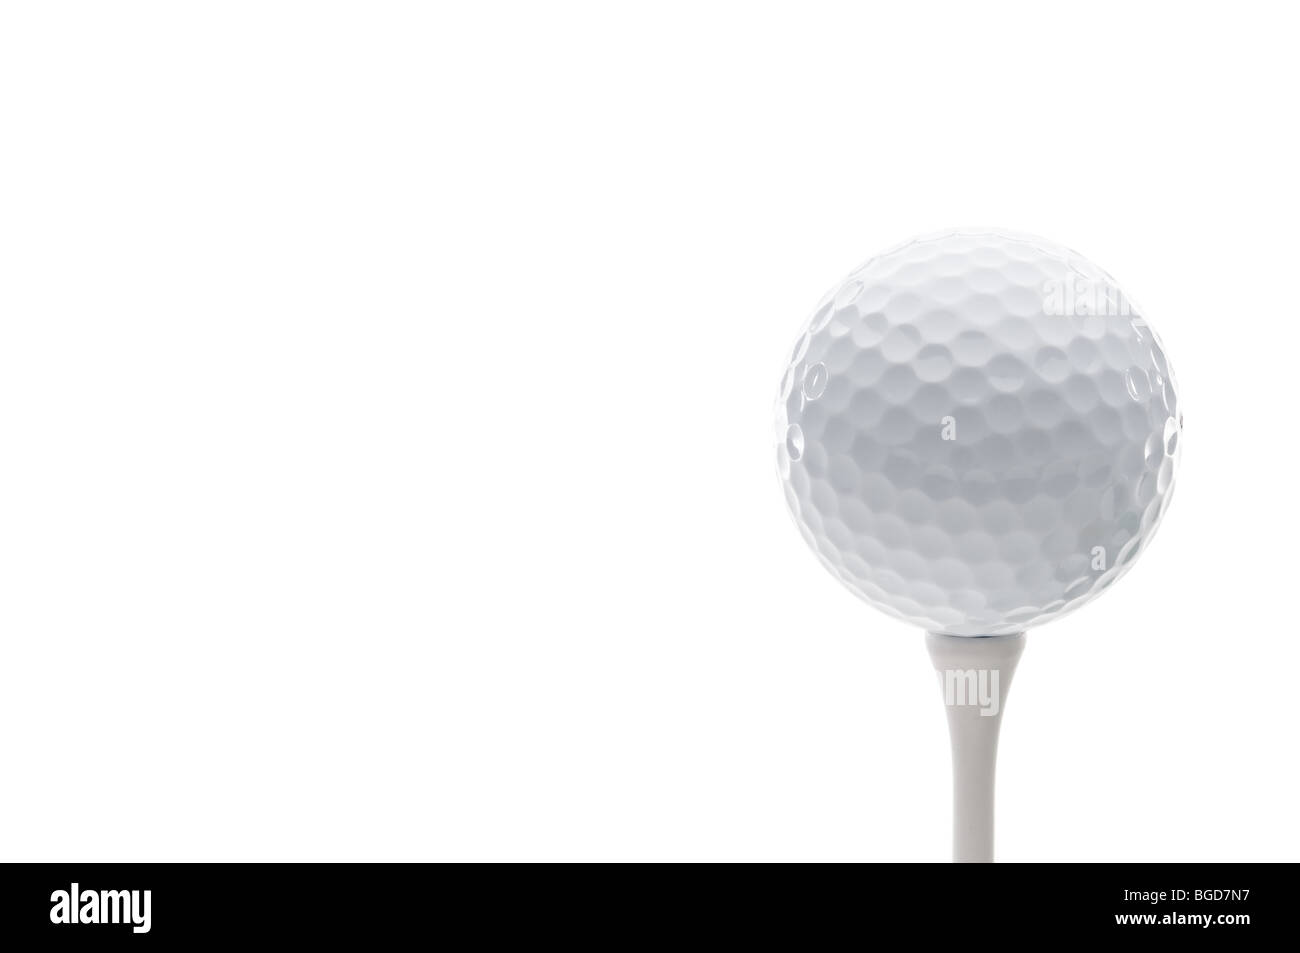 Horizontal close up of a golf ball on a tee Stock Photo